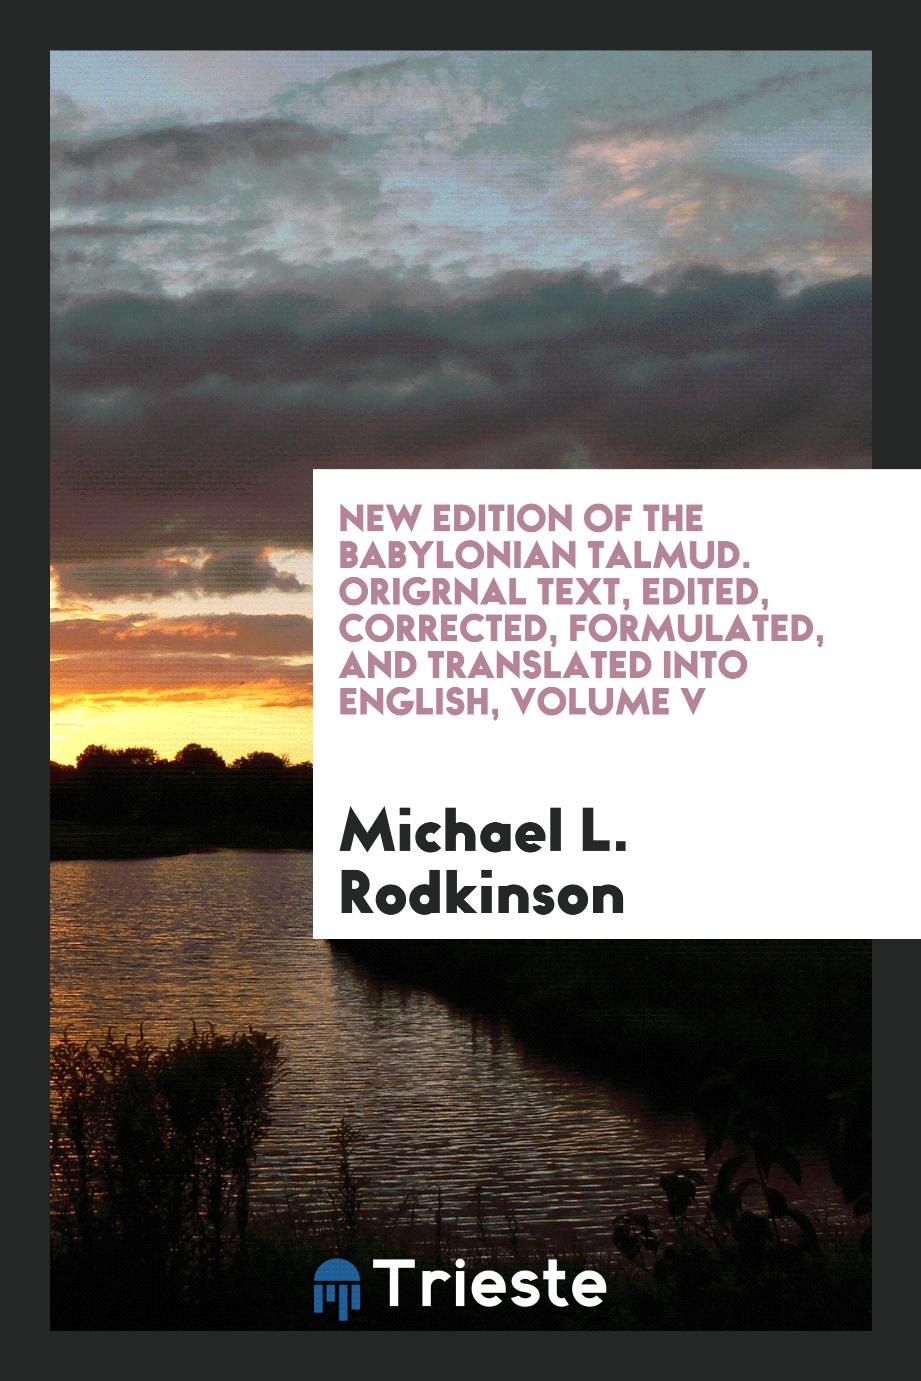 New Edition of the Babylonian Talmud. Origrnal Text, Edited, Corrected, Formulated, and Translated into English, Volume V